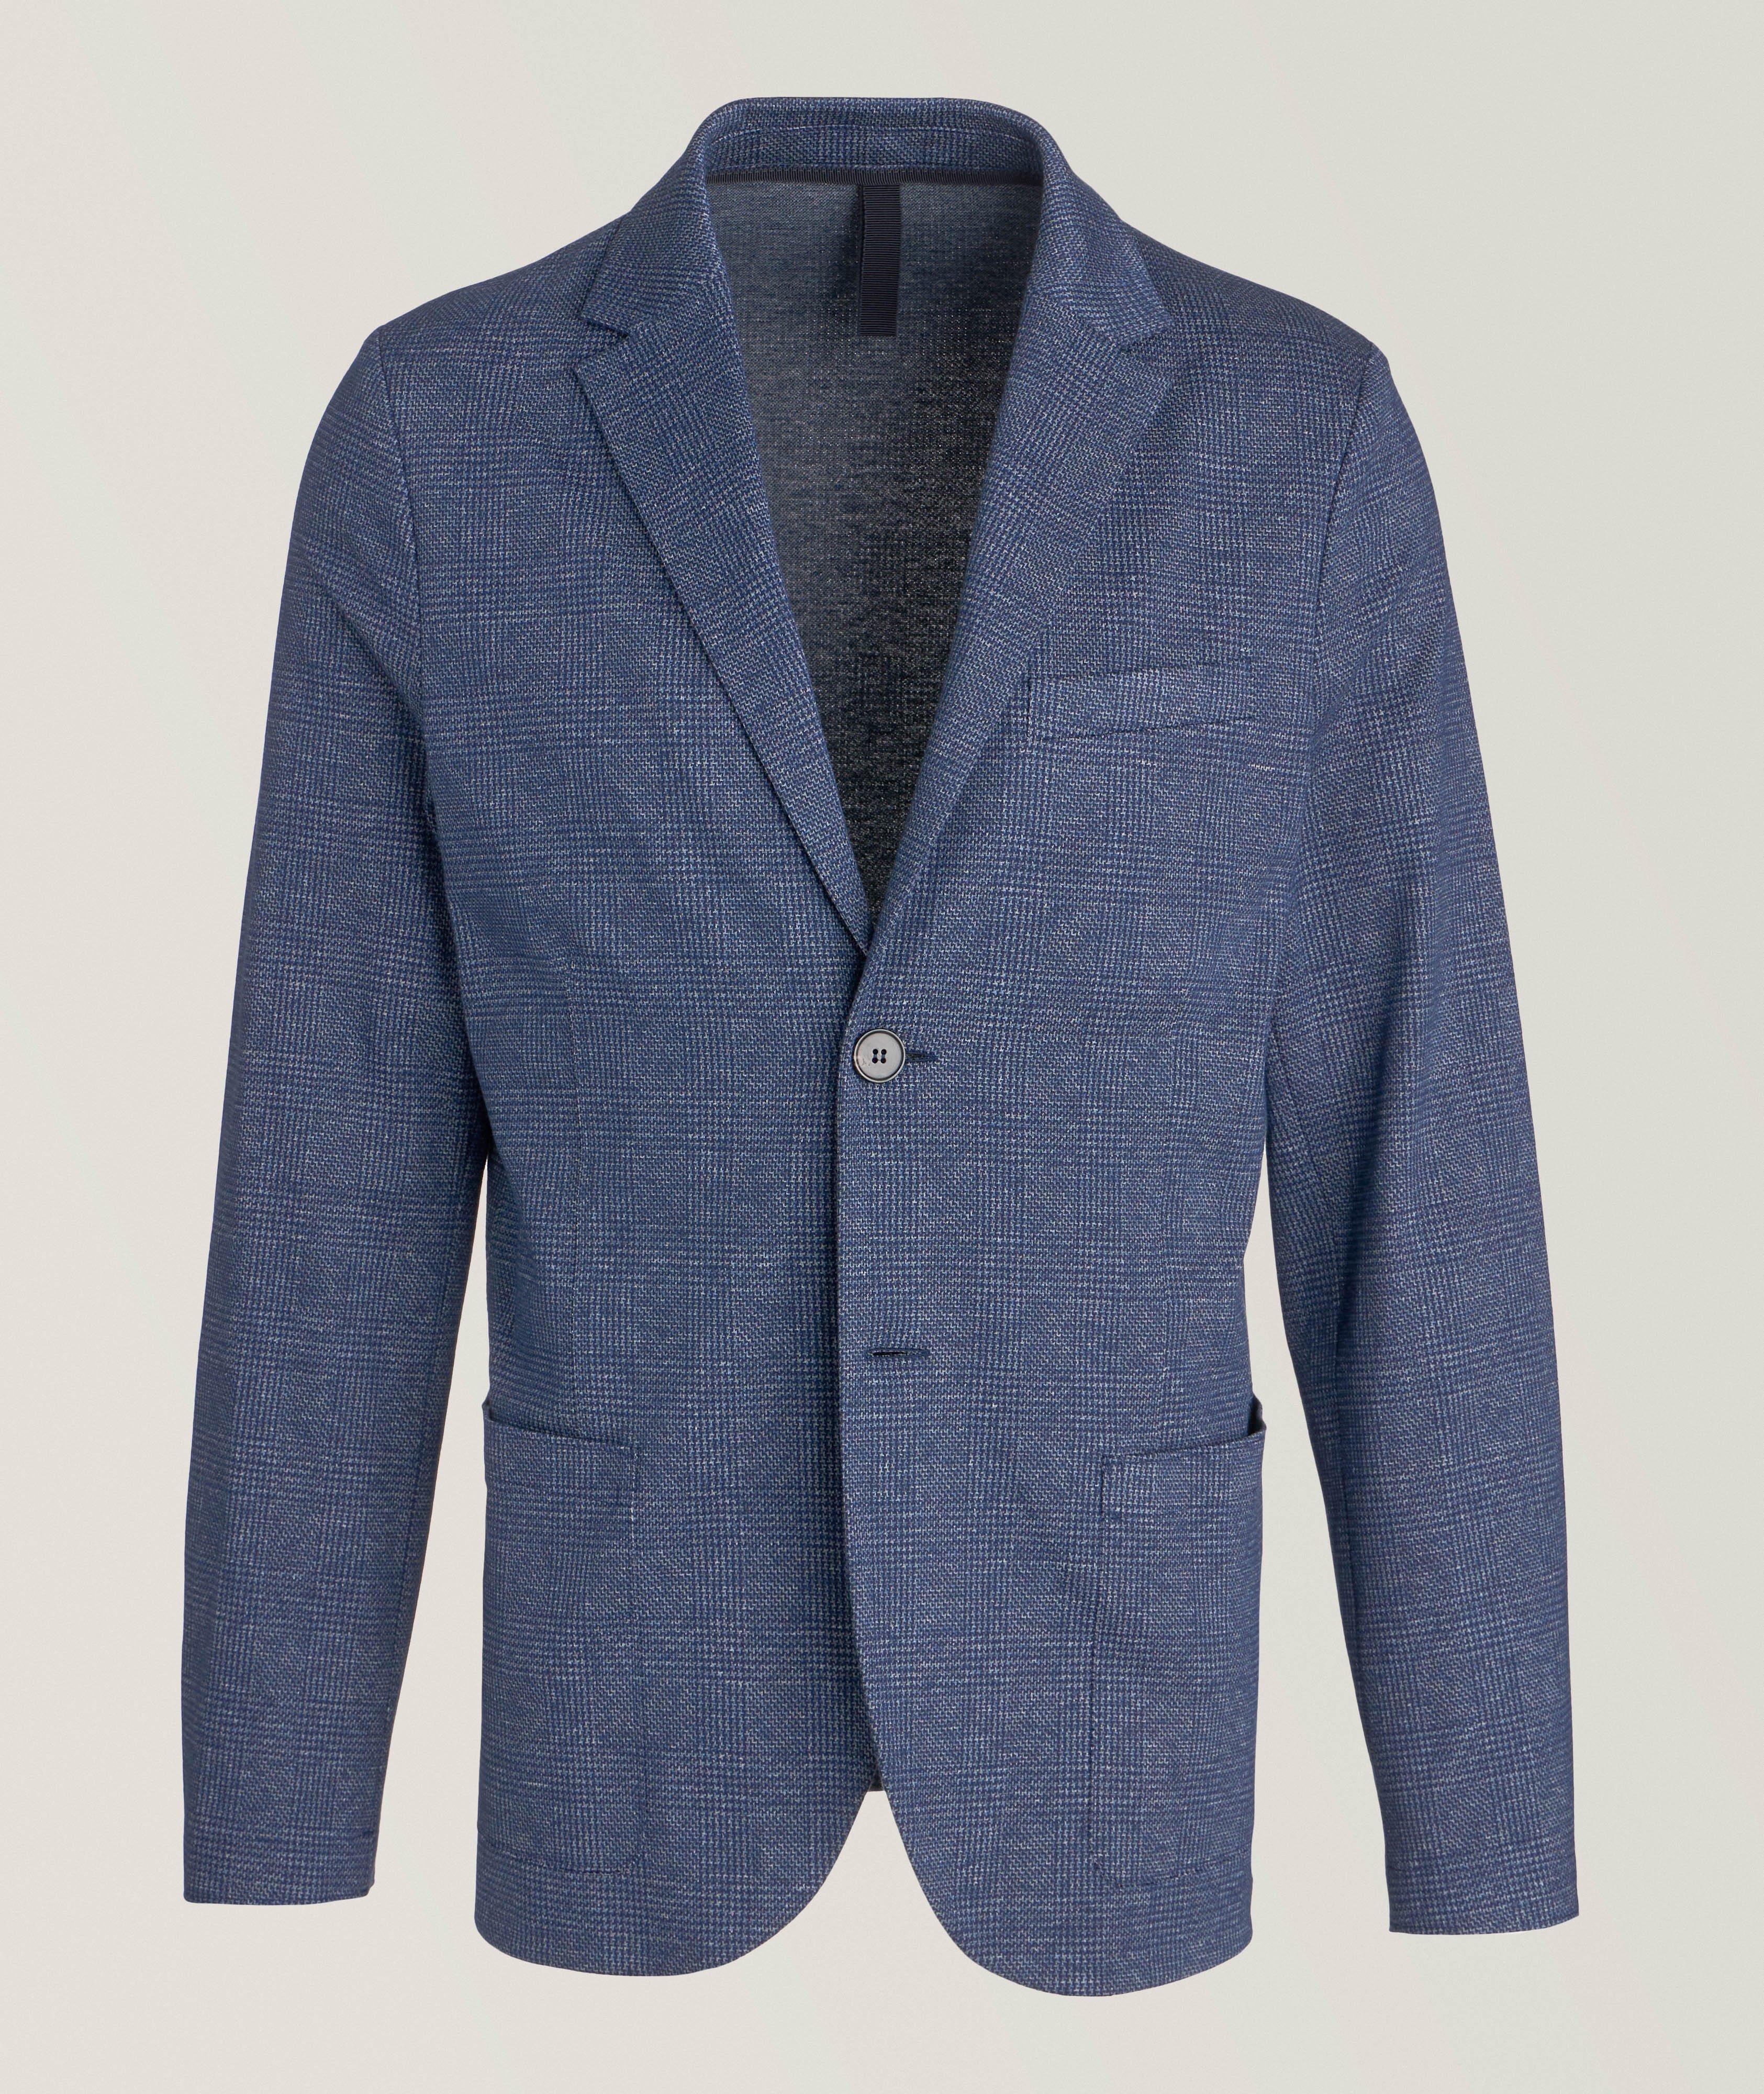 Prince Of Wales Cotton Sport Jacket image 0